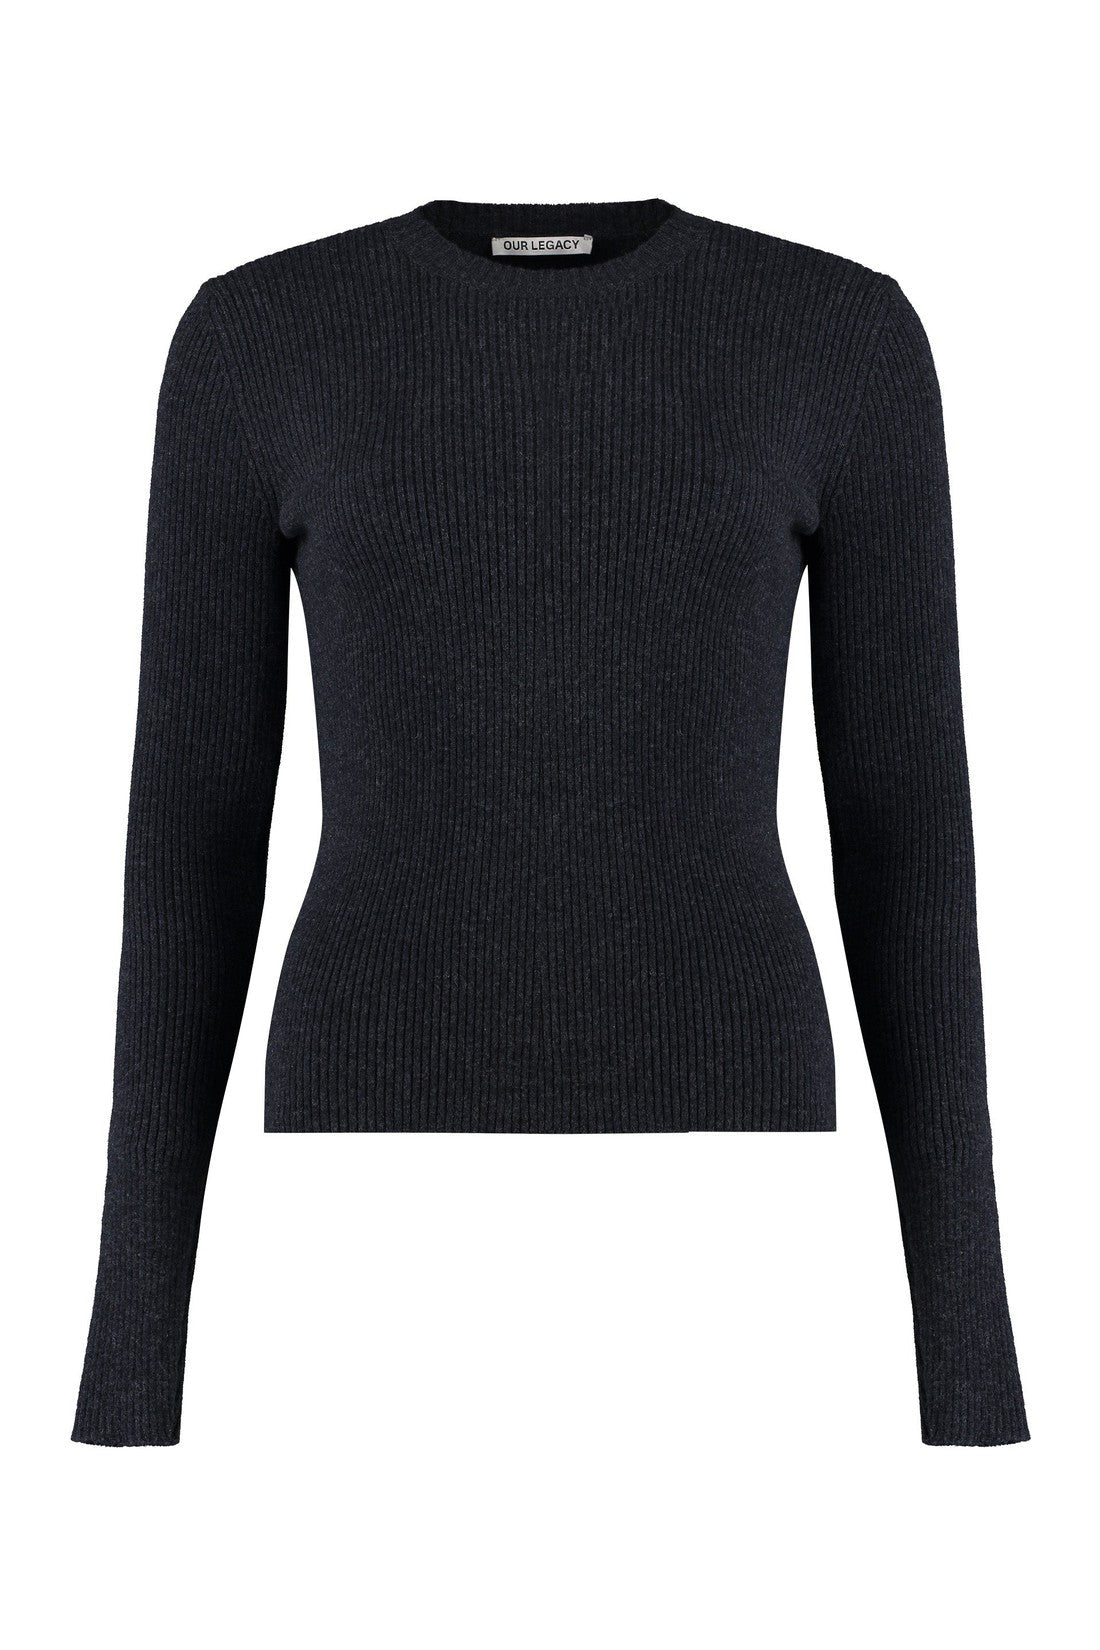 Our Legacy-OUTLET-SALE-Compact wool pullover-ARCHIVIST